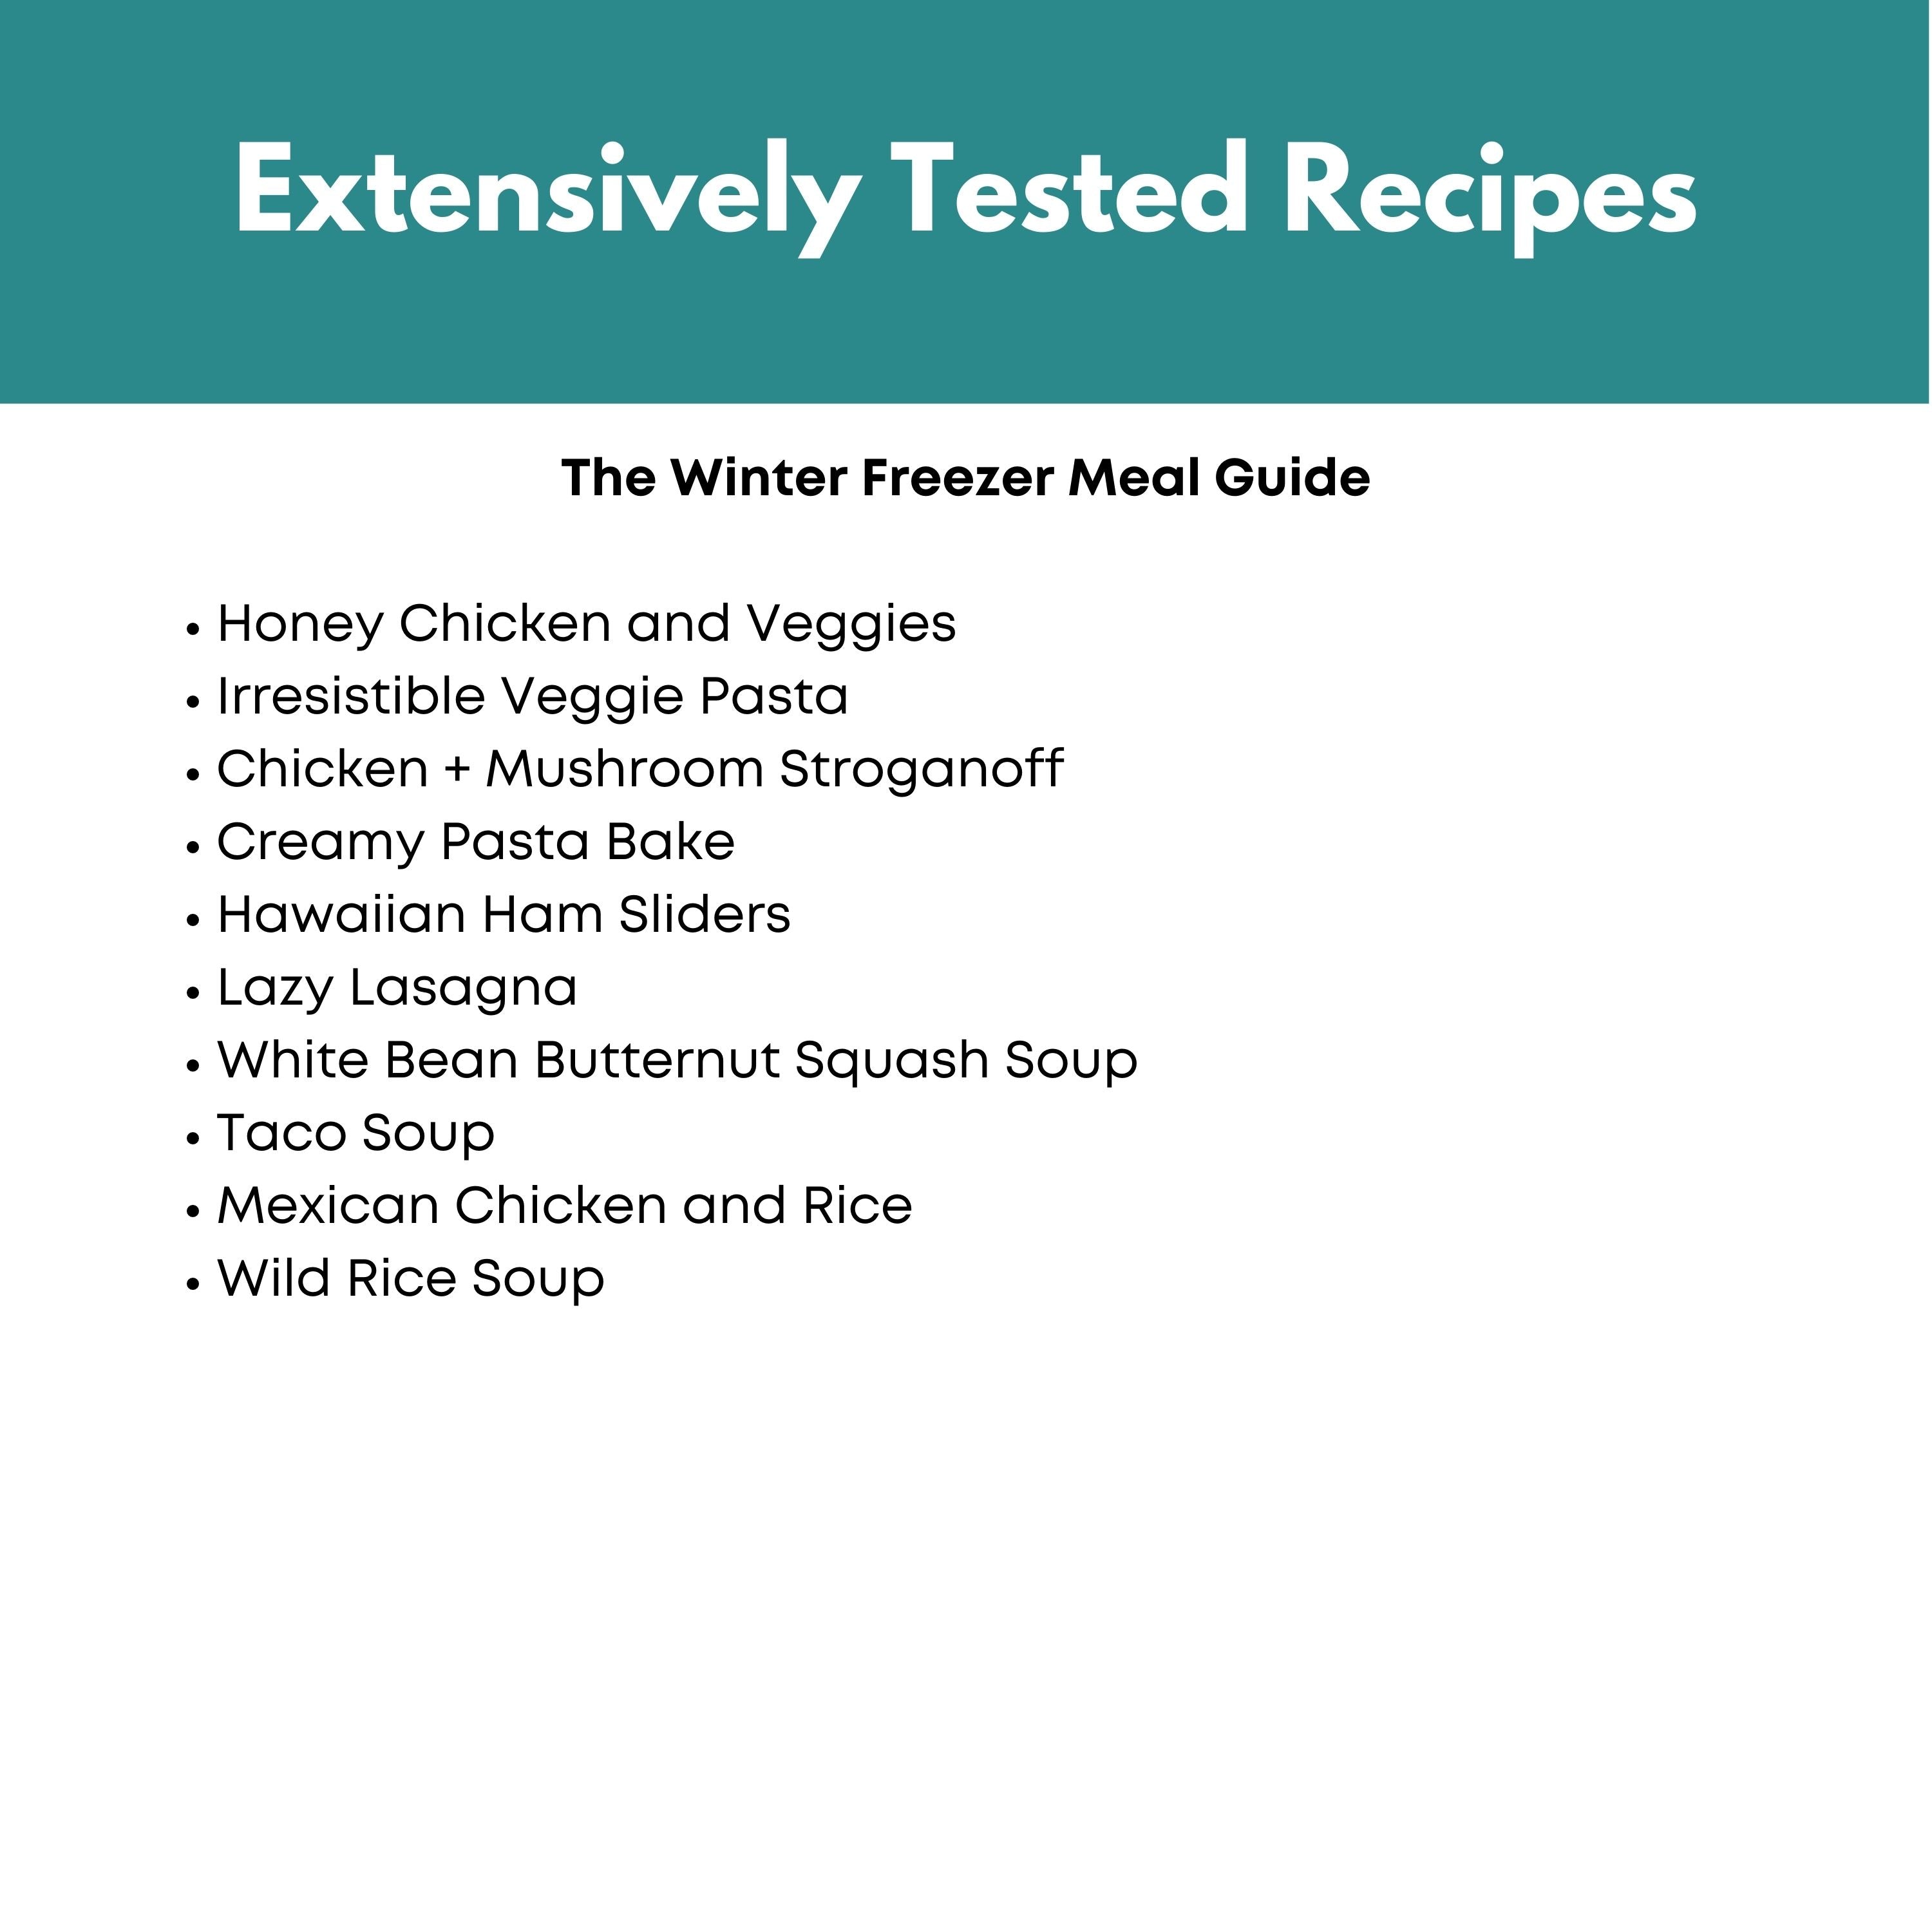 Winter Freezer Meal Guide